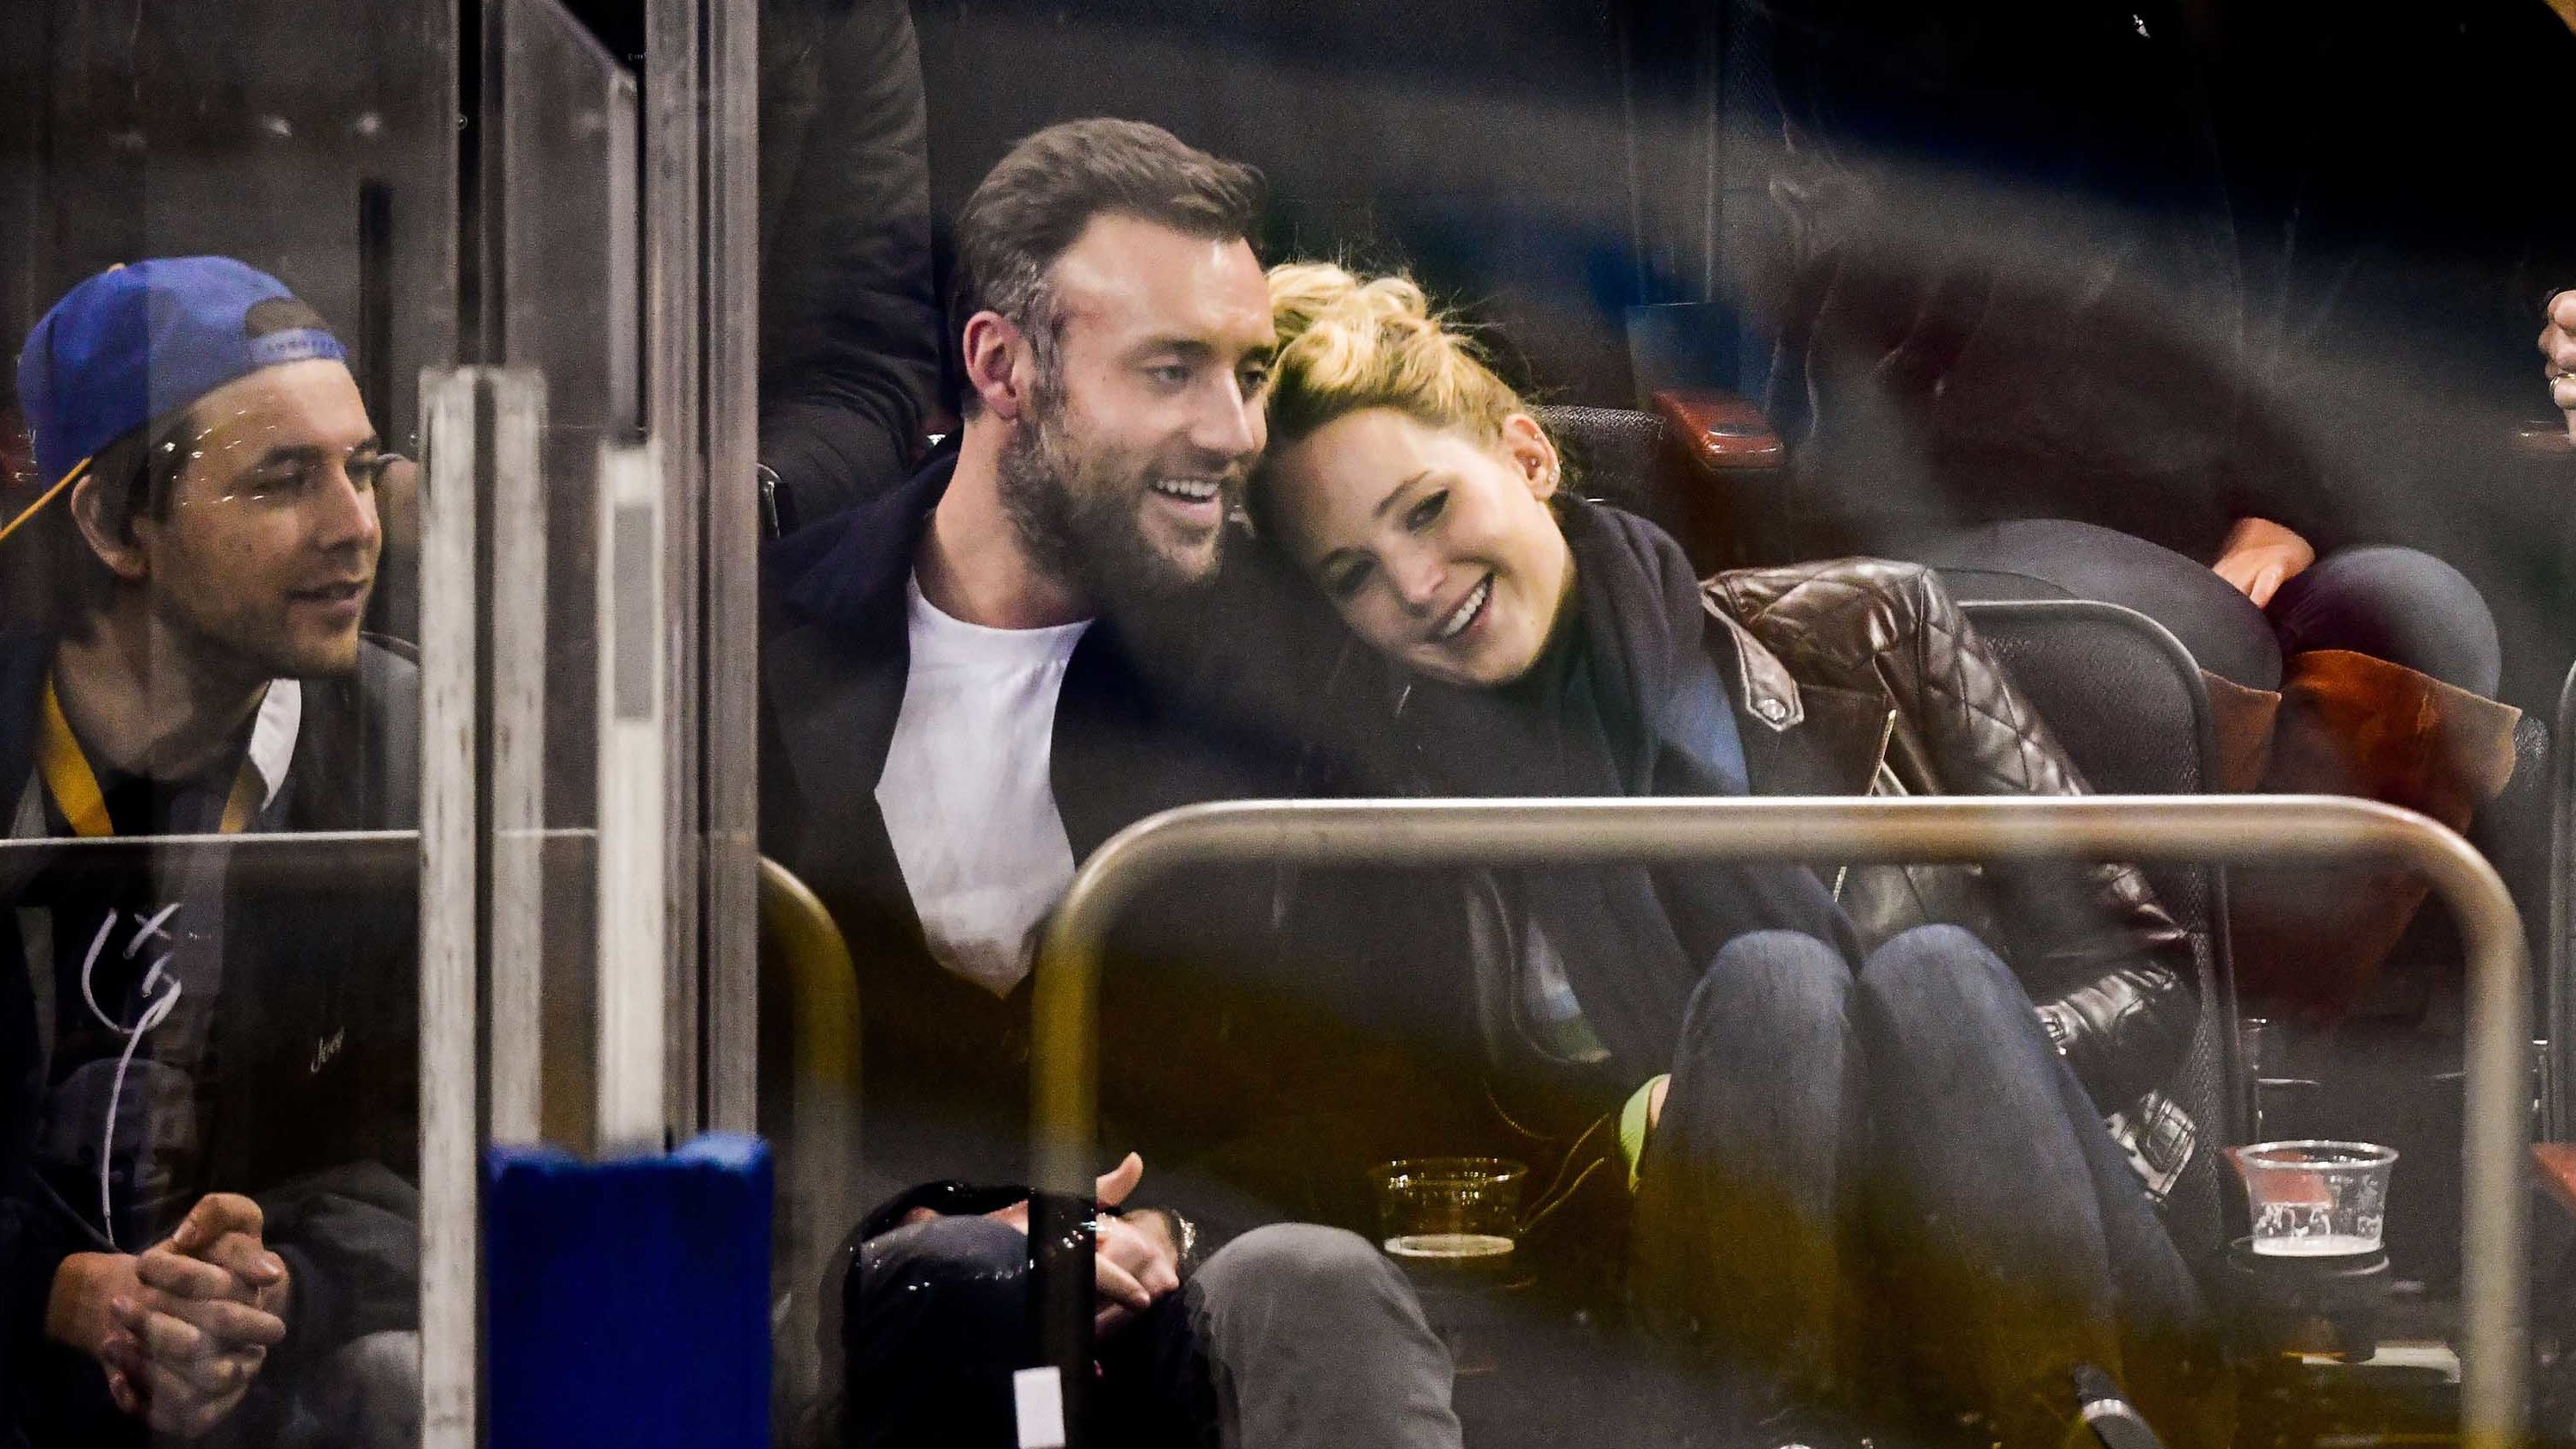 The couple, pictured here at an ice hockey match November 2018, wed in 2019.